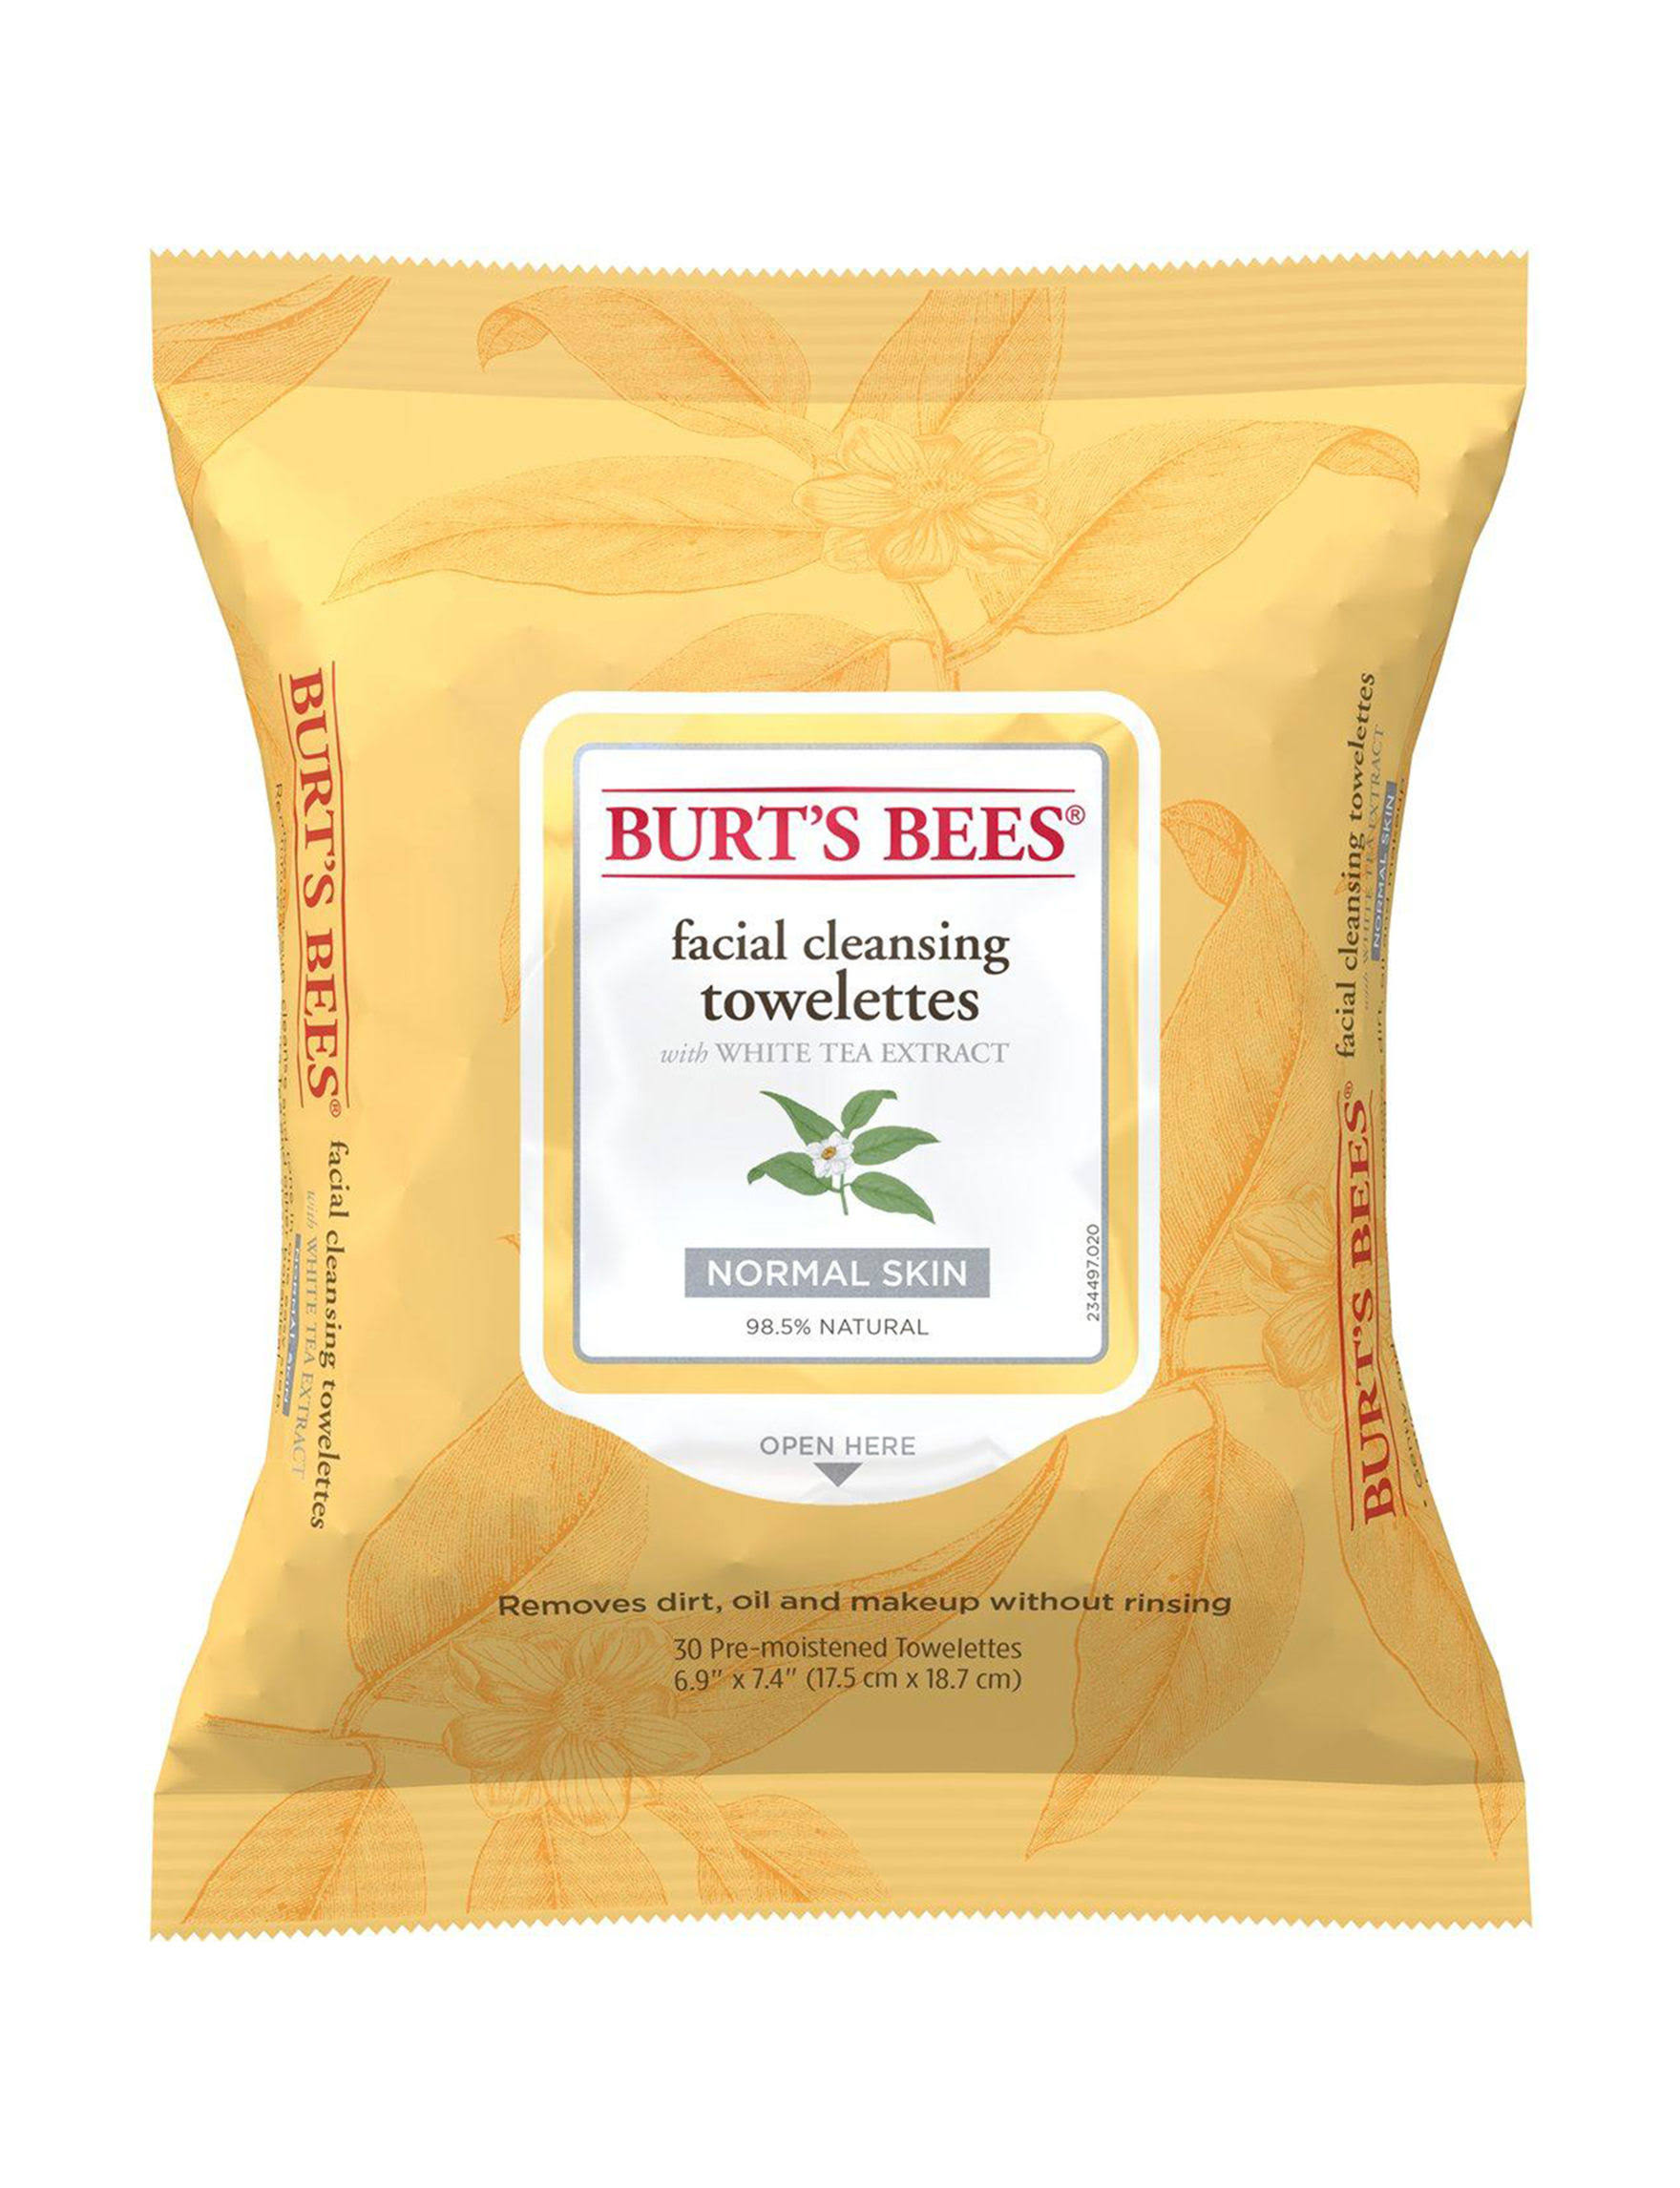 Burt's Bees Facial Cleansing Pre-Moistened Towelettes - 30 Pack